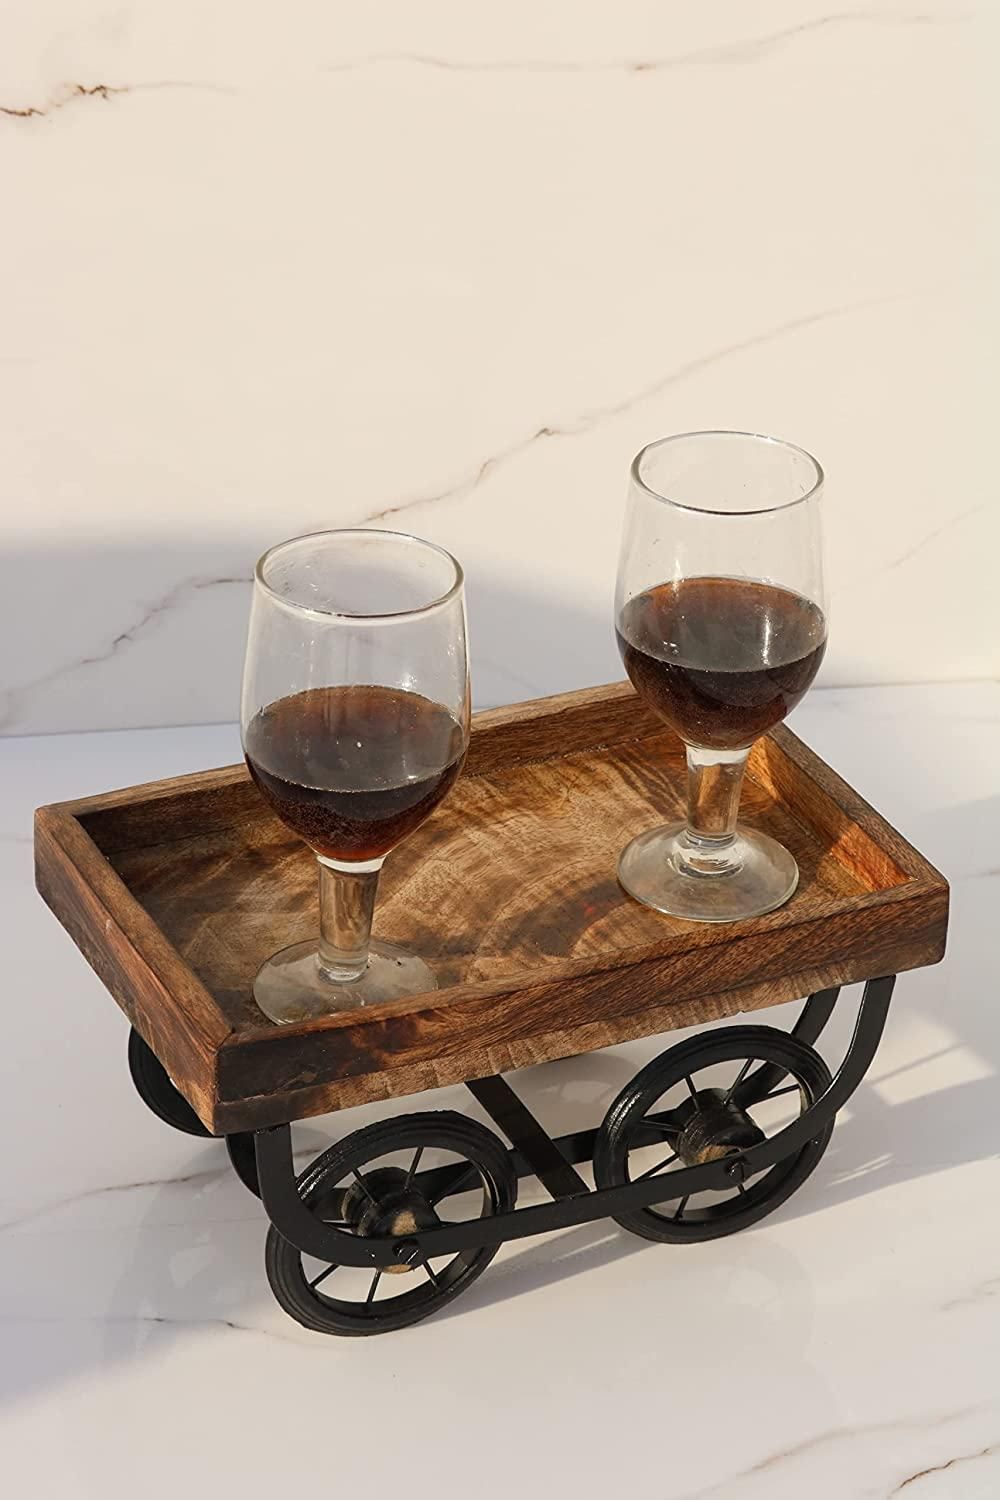 Wooden Handmade Redi thela with Moveable Wheels for Wine Bottle Holder 3